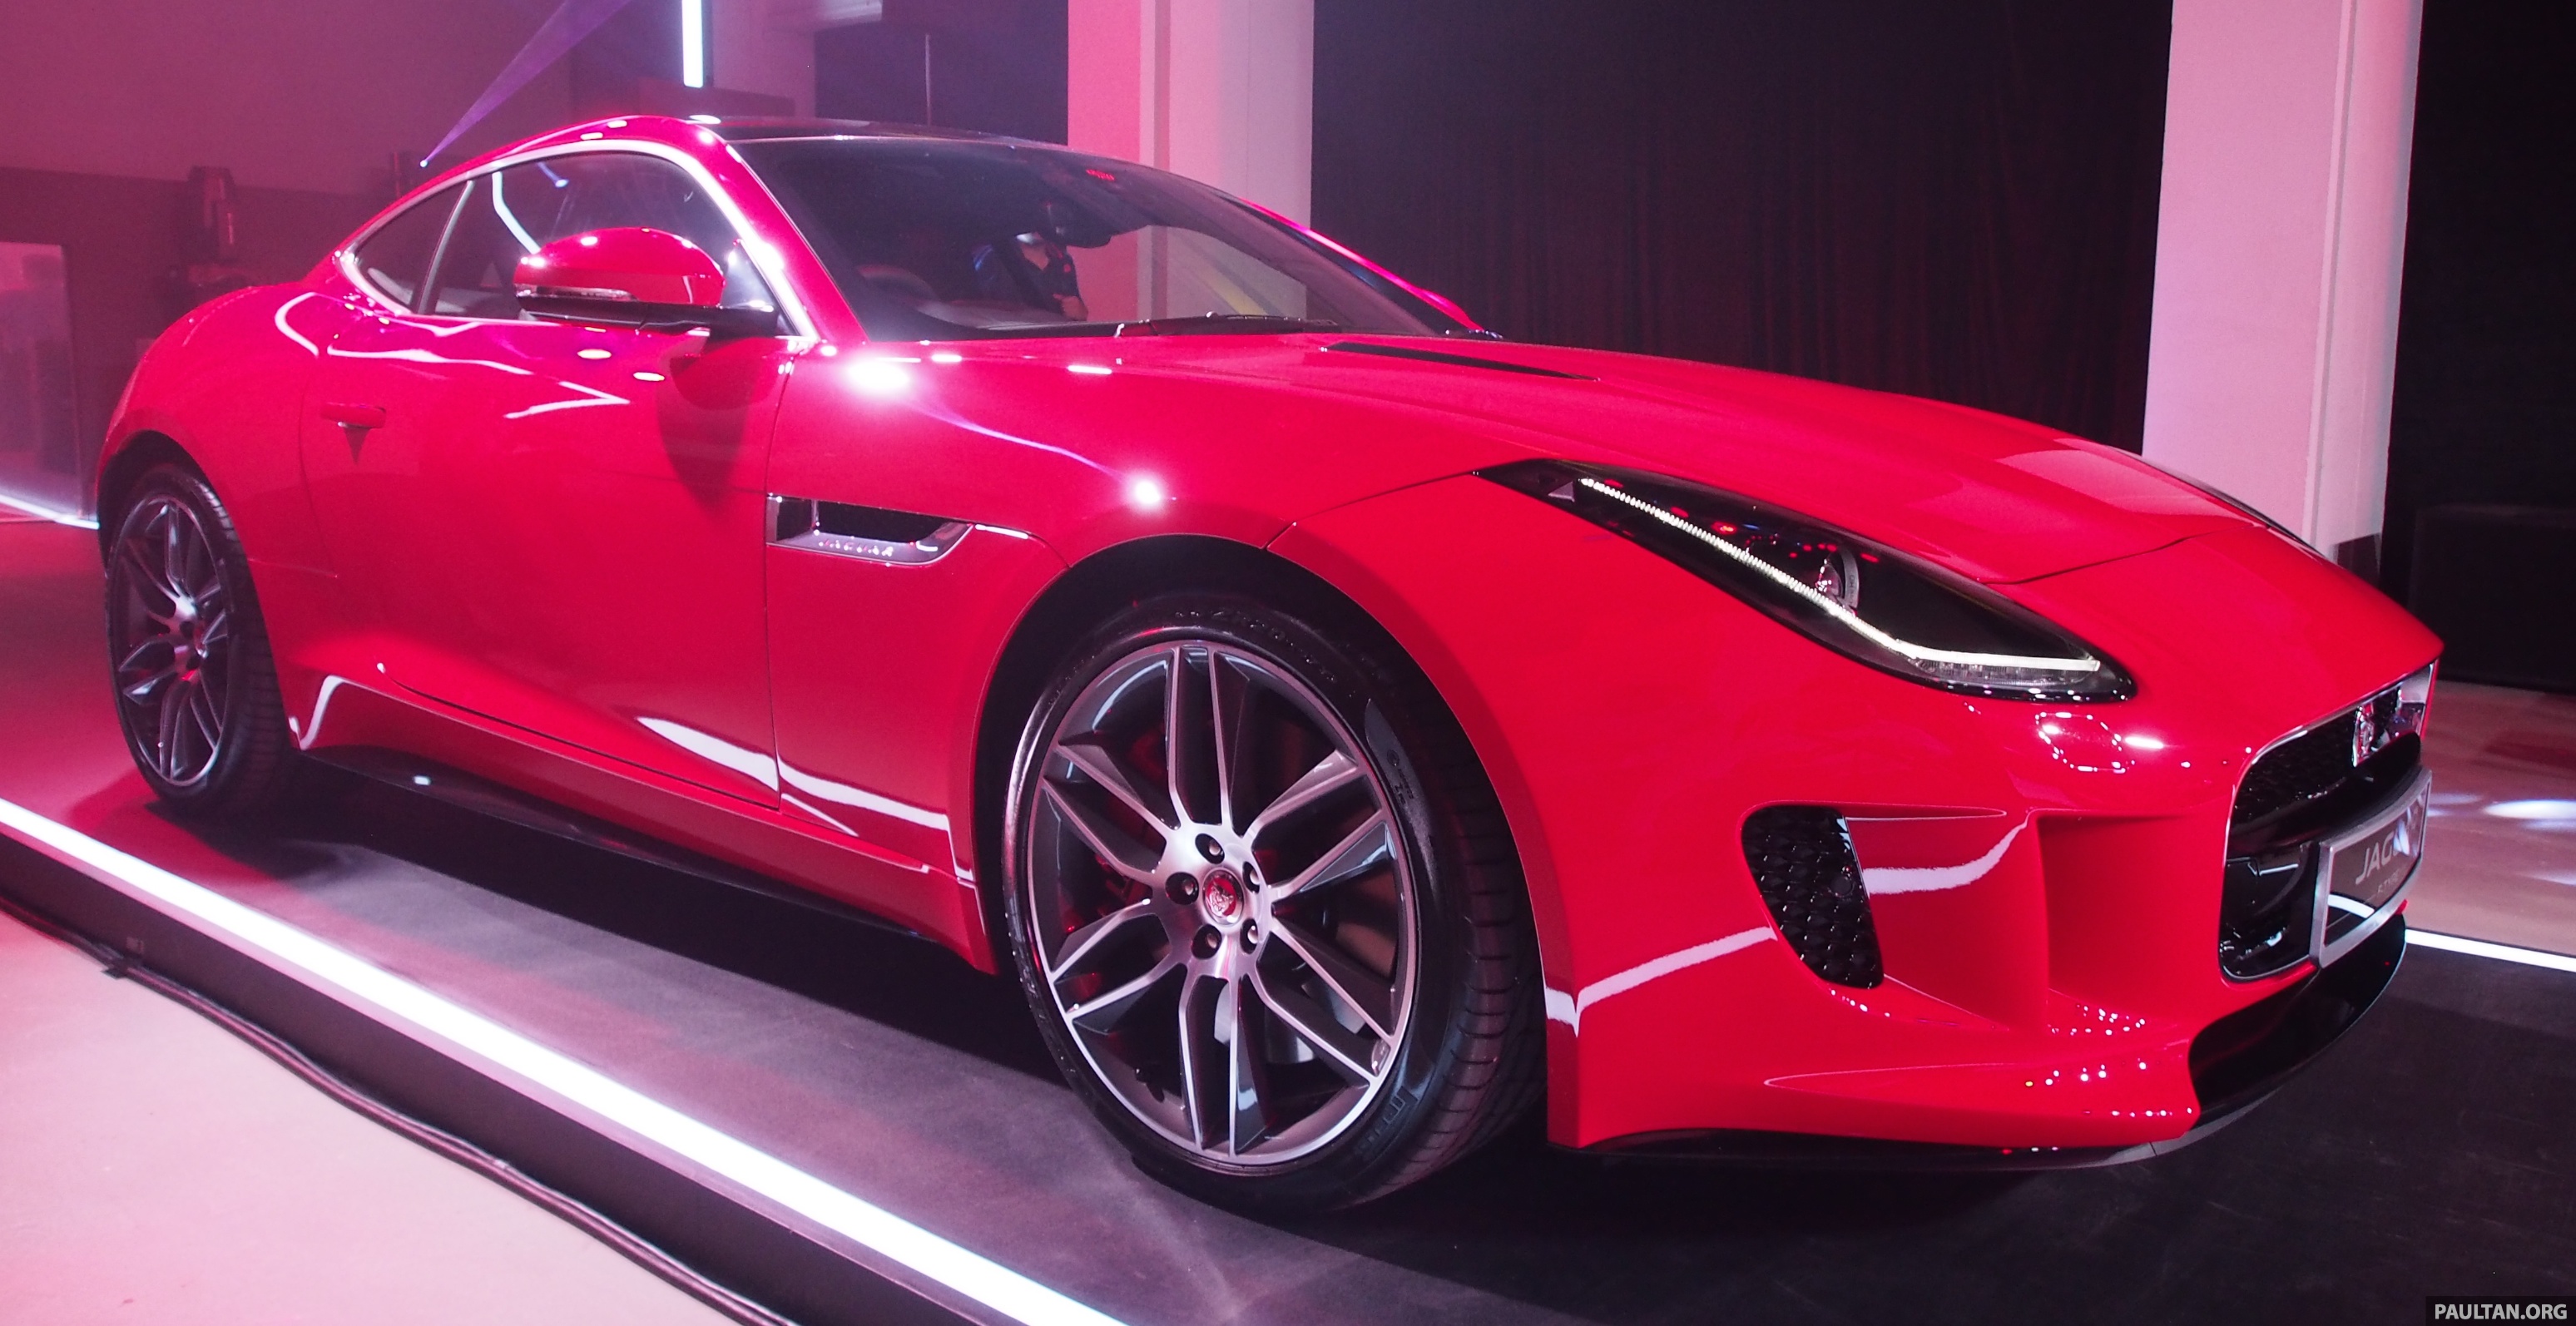 Jaguar F-Type Coupe coming to Malaysia in Q3 2014 OLYMPUS DIGITAL